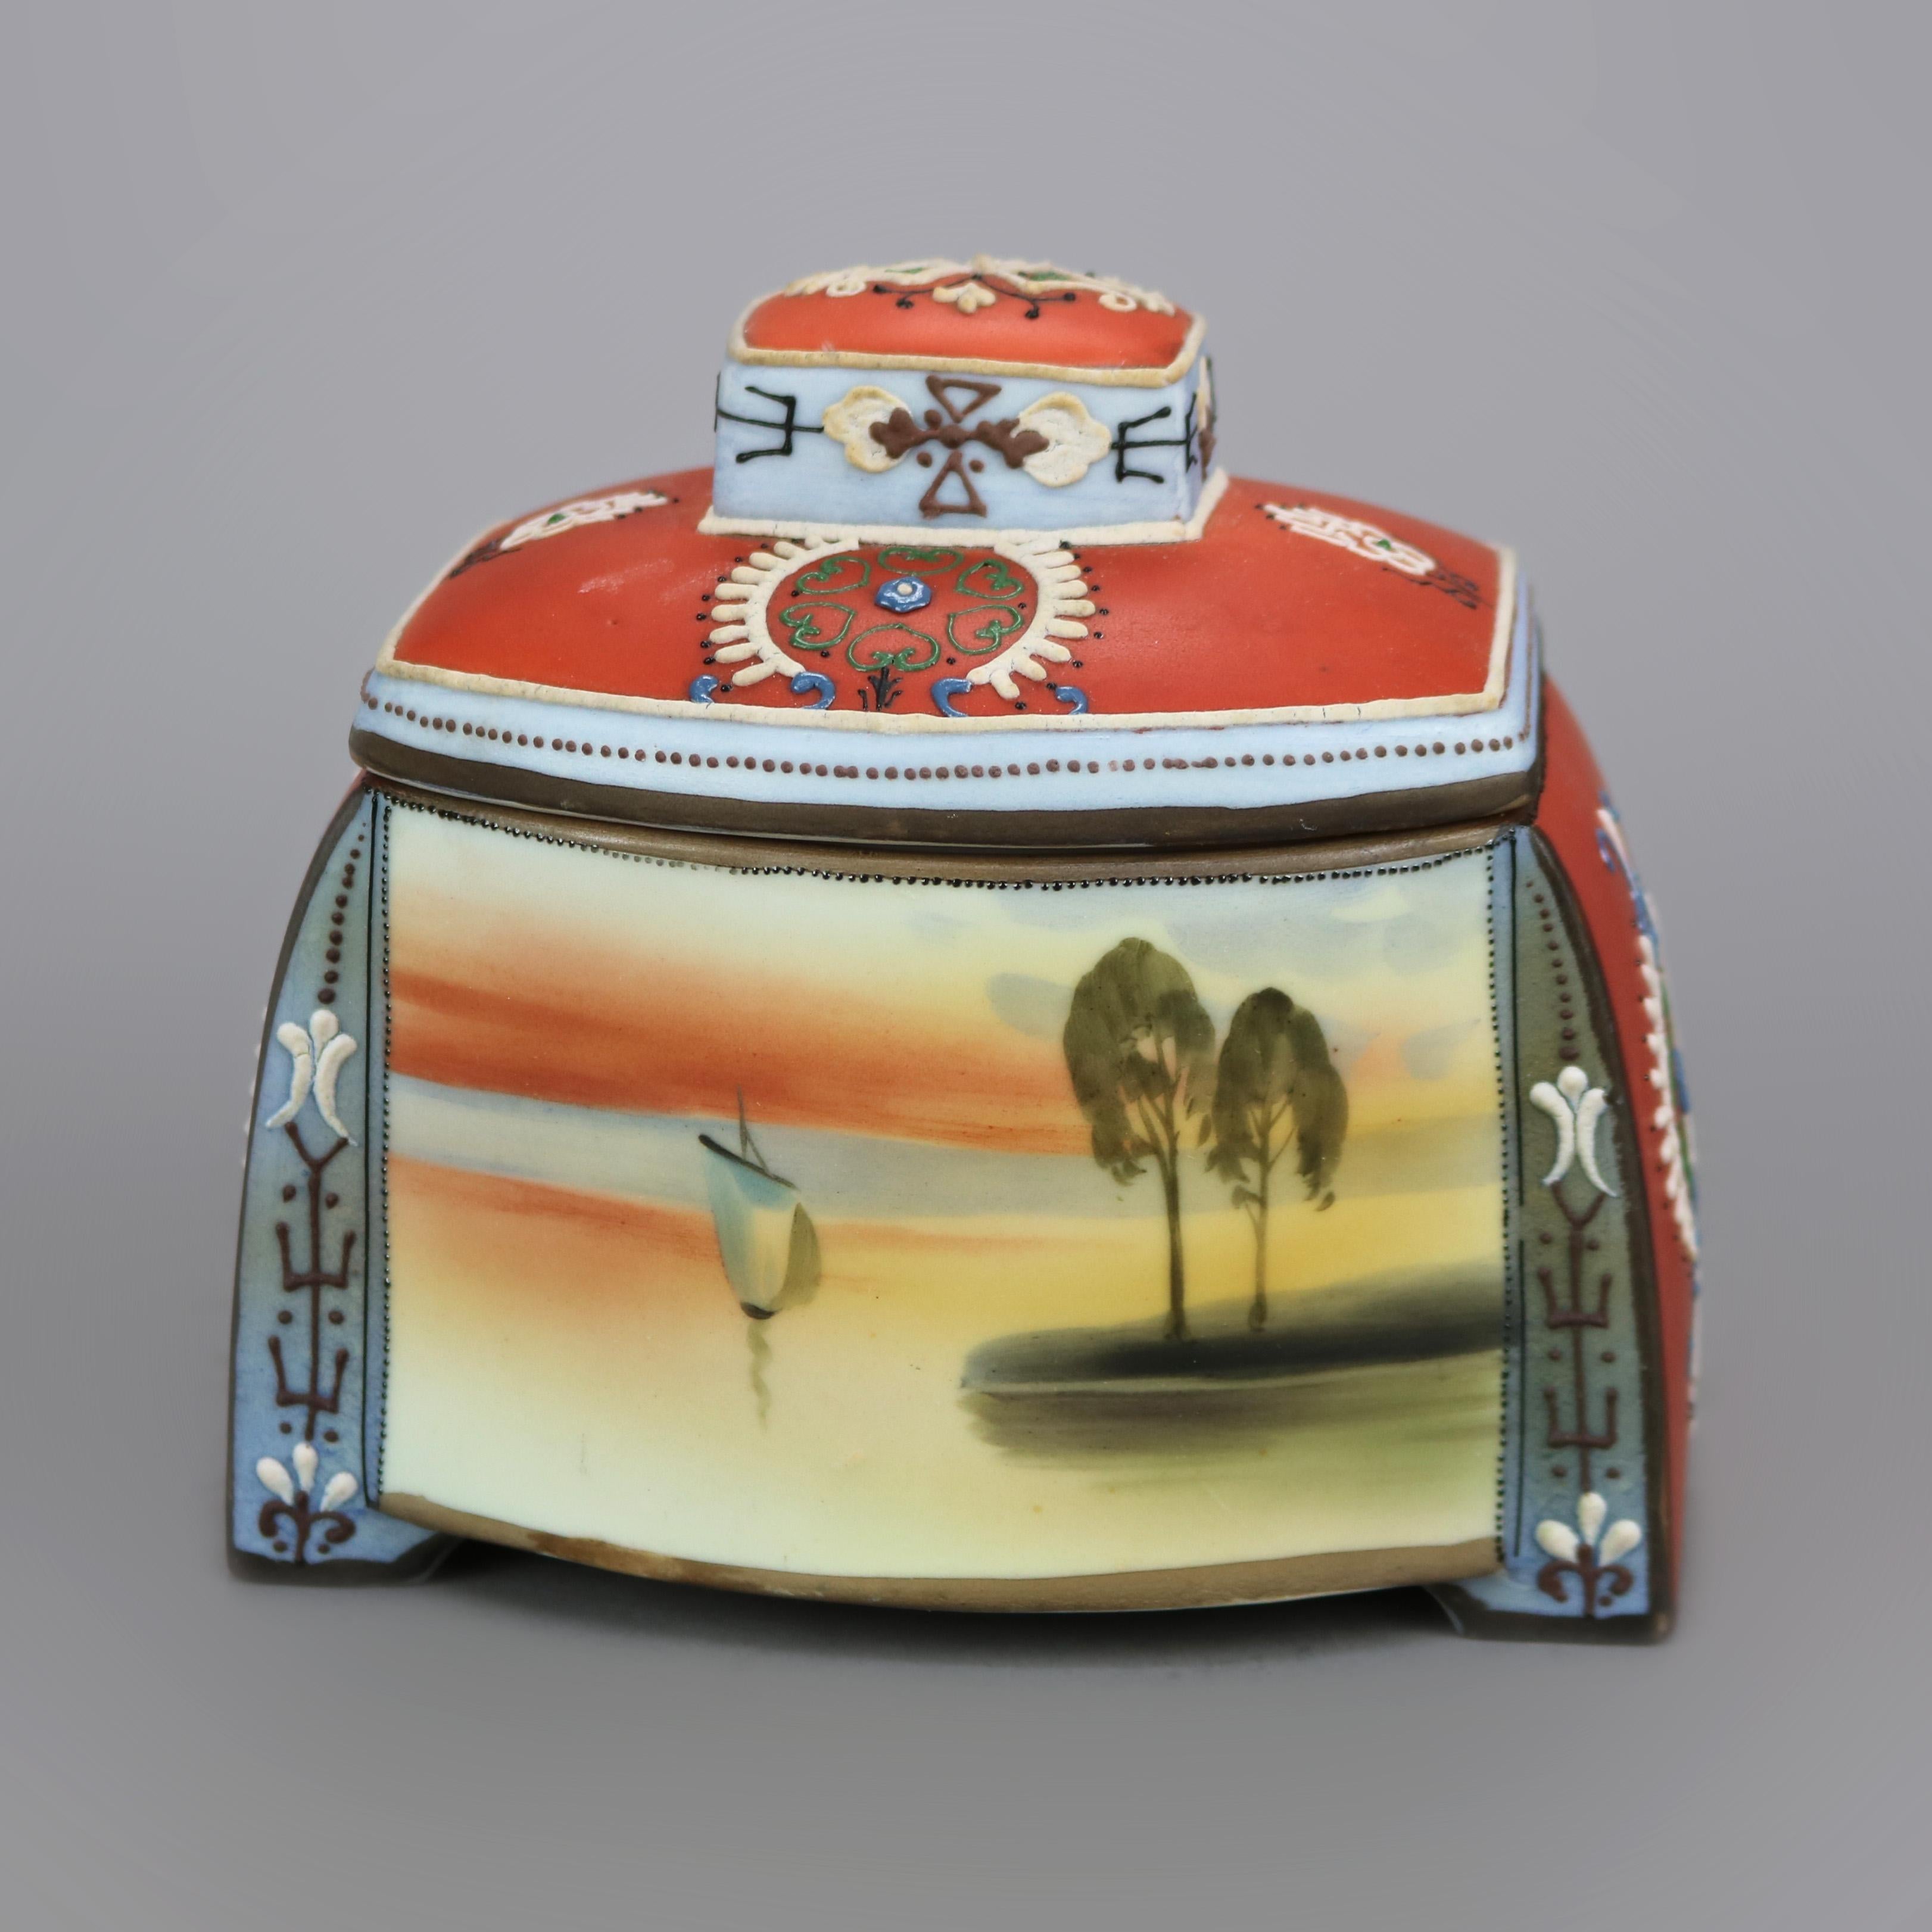 An antique Egyptian Revival Japanese Nippon scenic and footed humidor (tobacco jar) offers porcelain construction with hand painted maritime scene having harbor and junket, moriage decorated throughout with stylized tribal design, maker stamp on